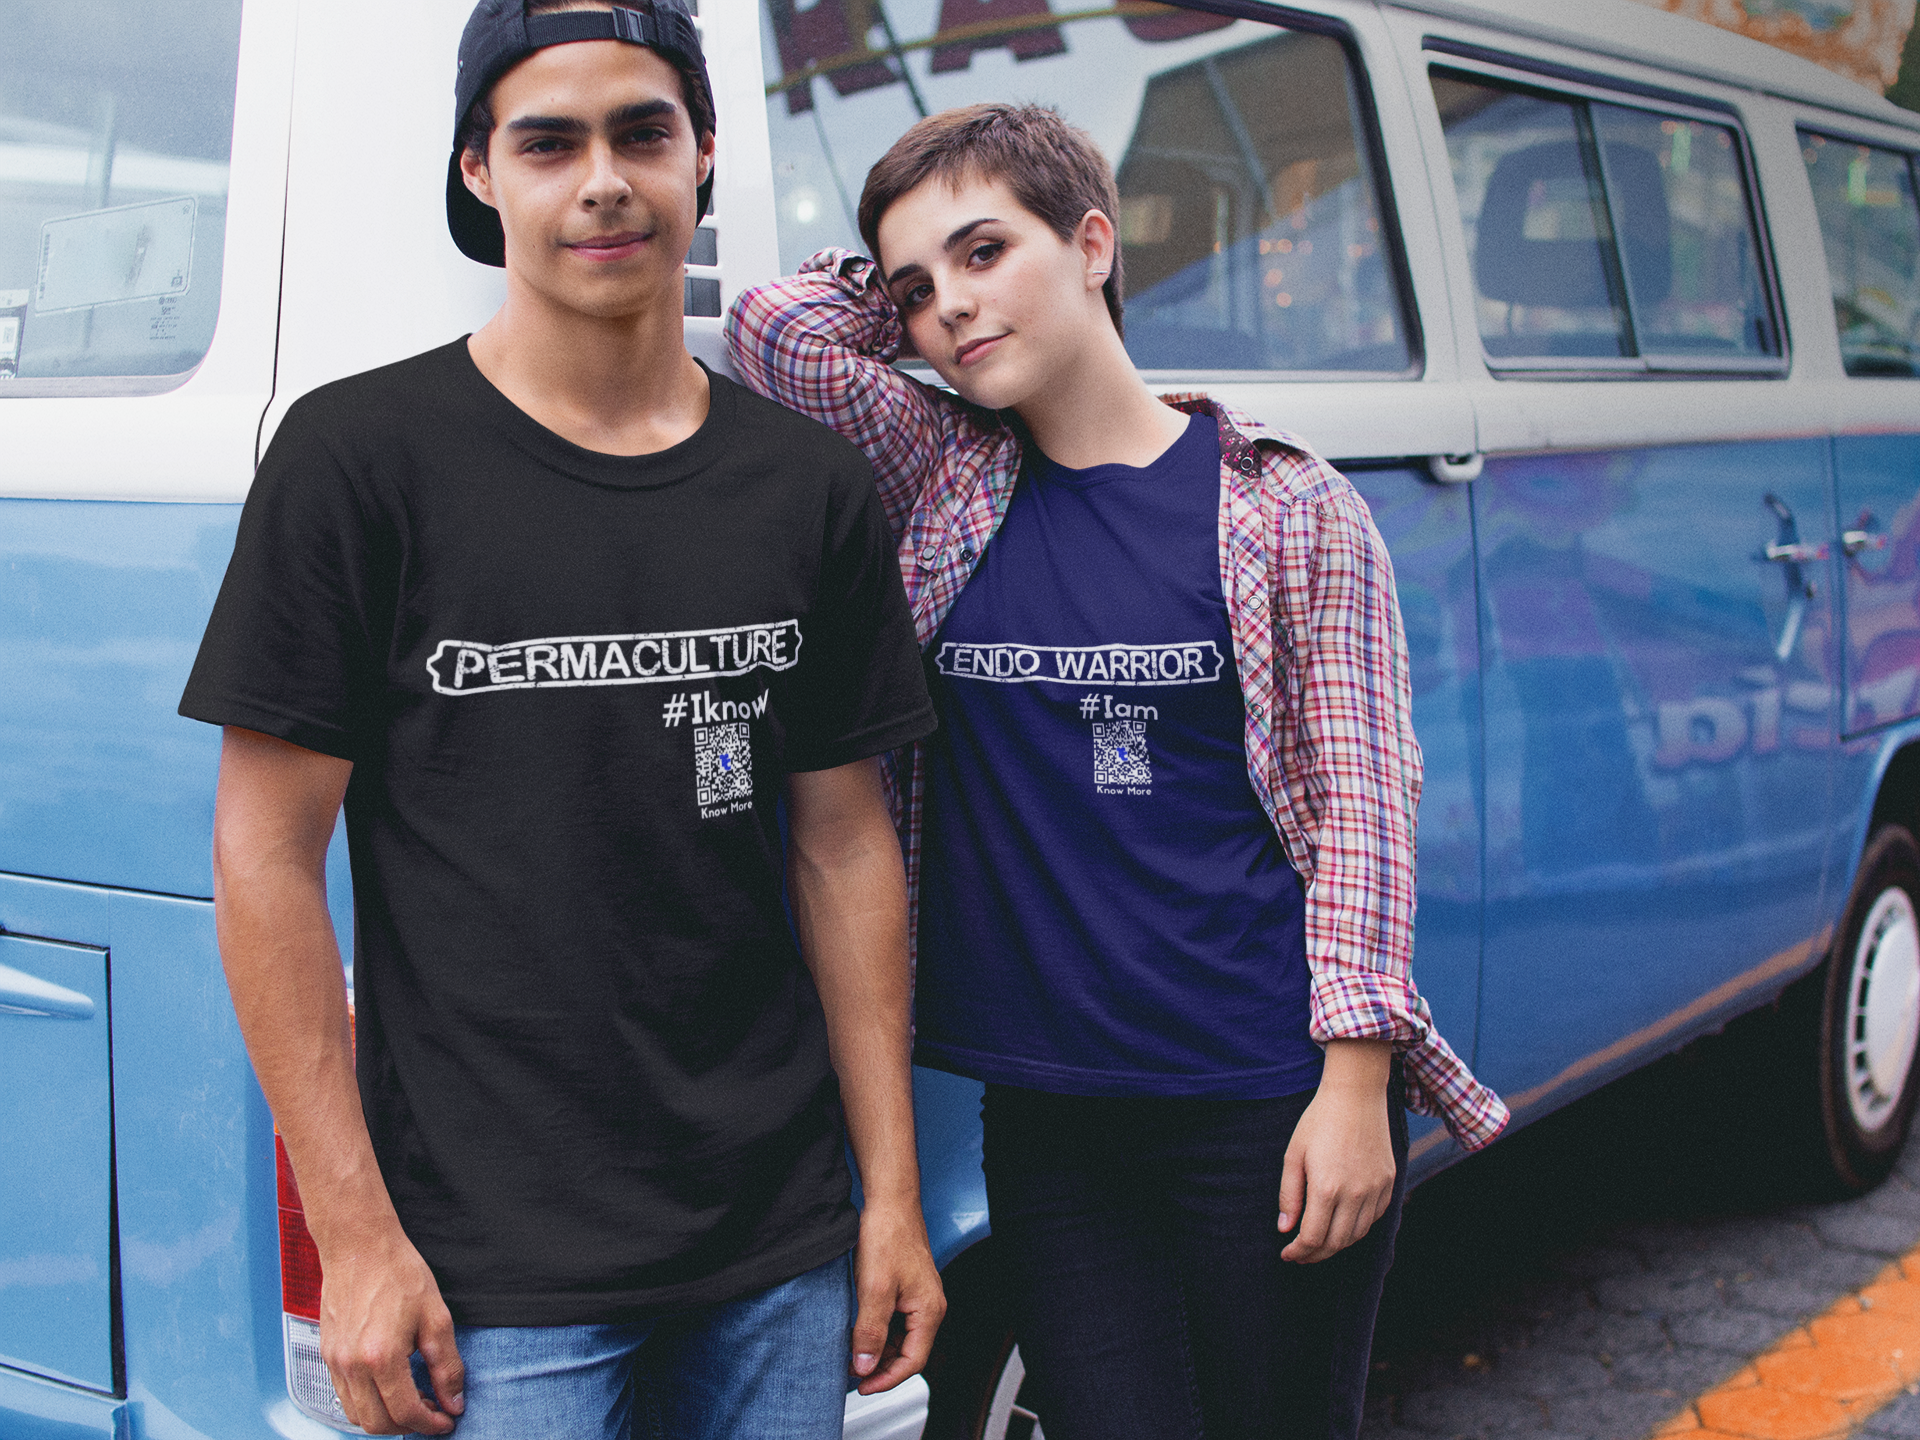 Title: Share The Story Behind Your CLAIM™. A male & female presenting couple are standing in front of a blue van. One person is wearing a black CLAIM It Tee™ with {PERMACULTURE} #Iknow. The other is wearing a navy blue one CLAIMING™ {ENDO WARRIOR} #Iam.